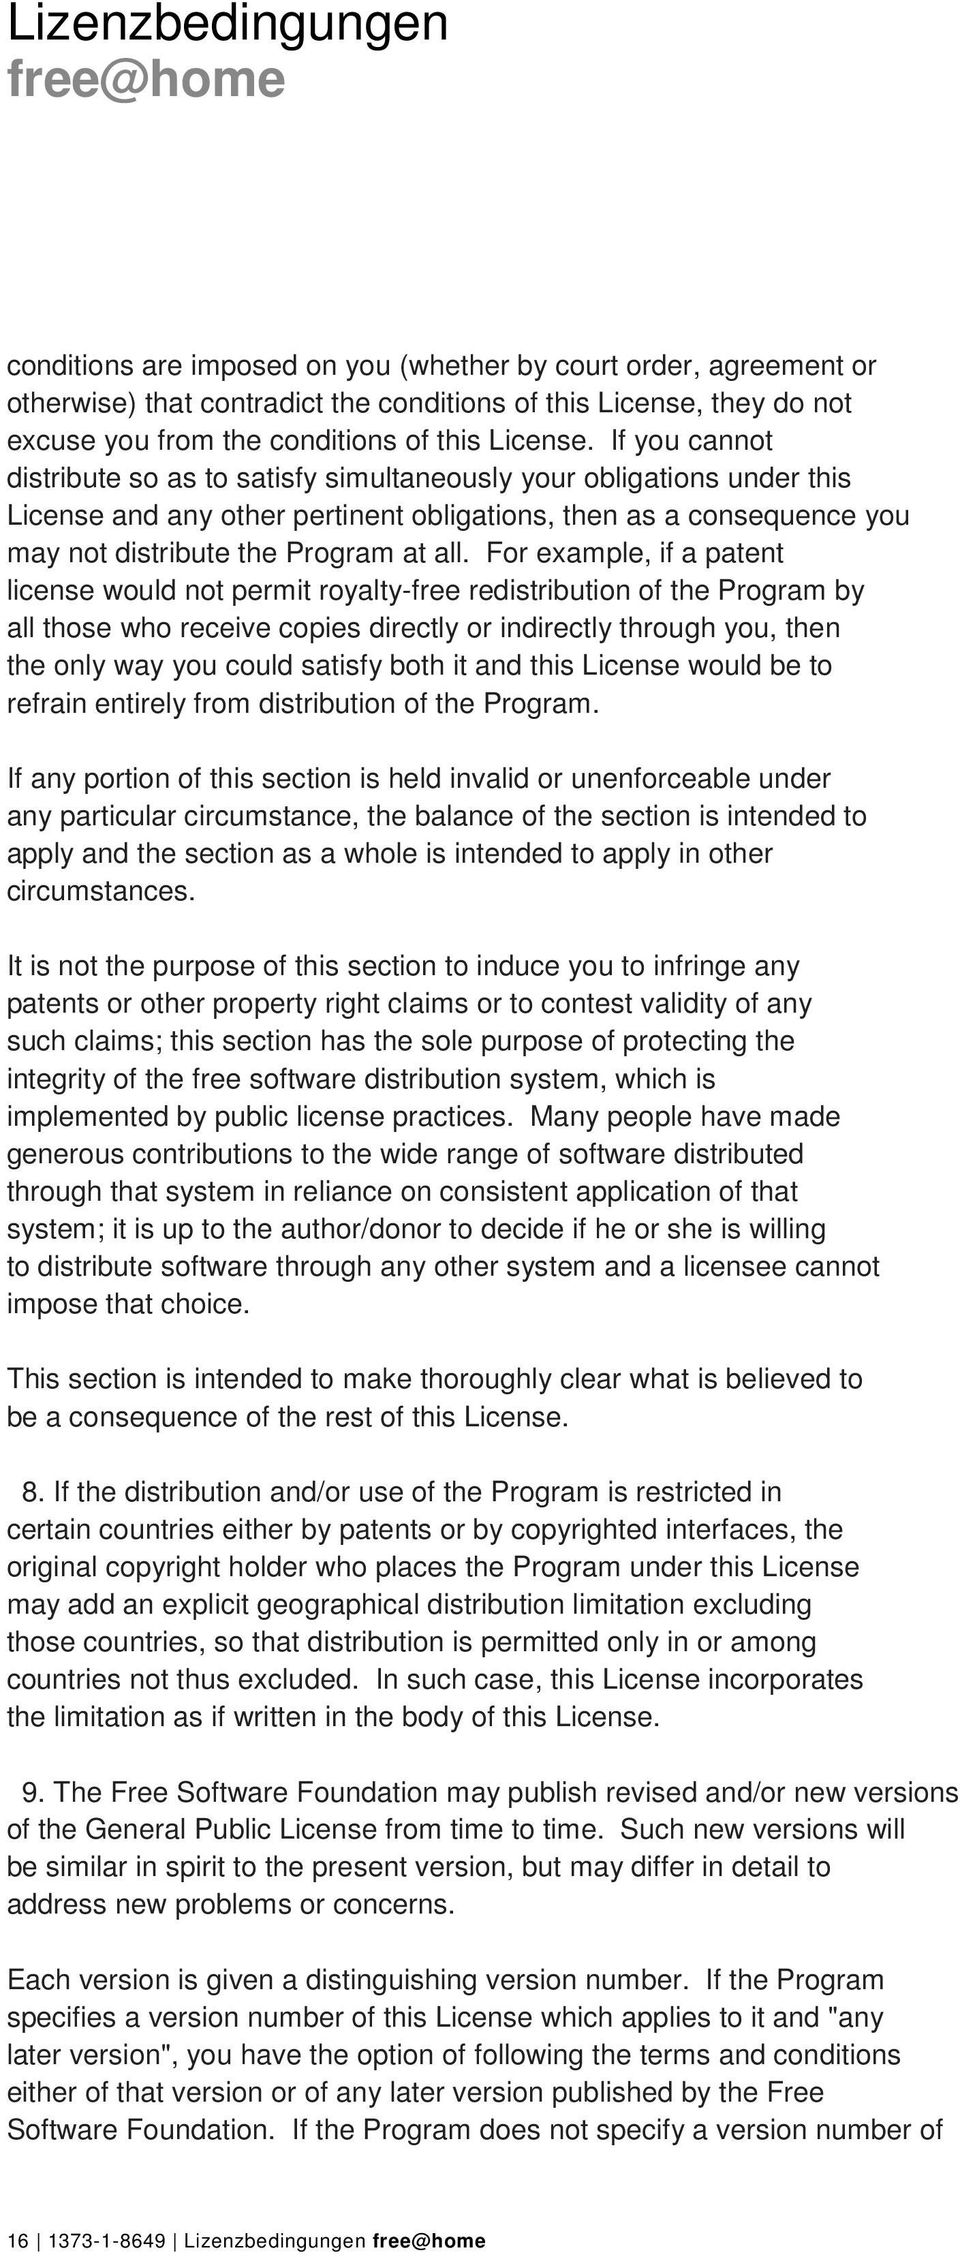 If you cannot distribute so as to satisfy simultaneously your obligations under this License and any other pertinent obligations, then as a consequence you may not distribute the Program at all.